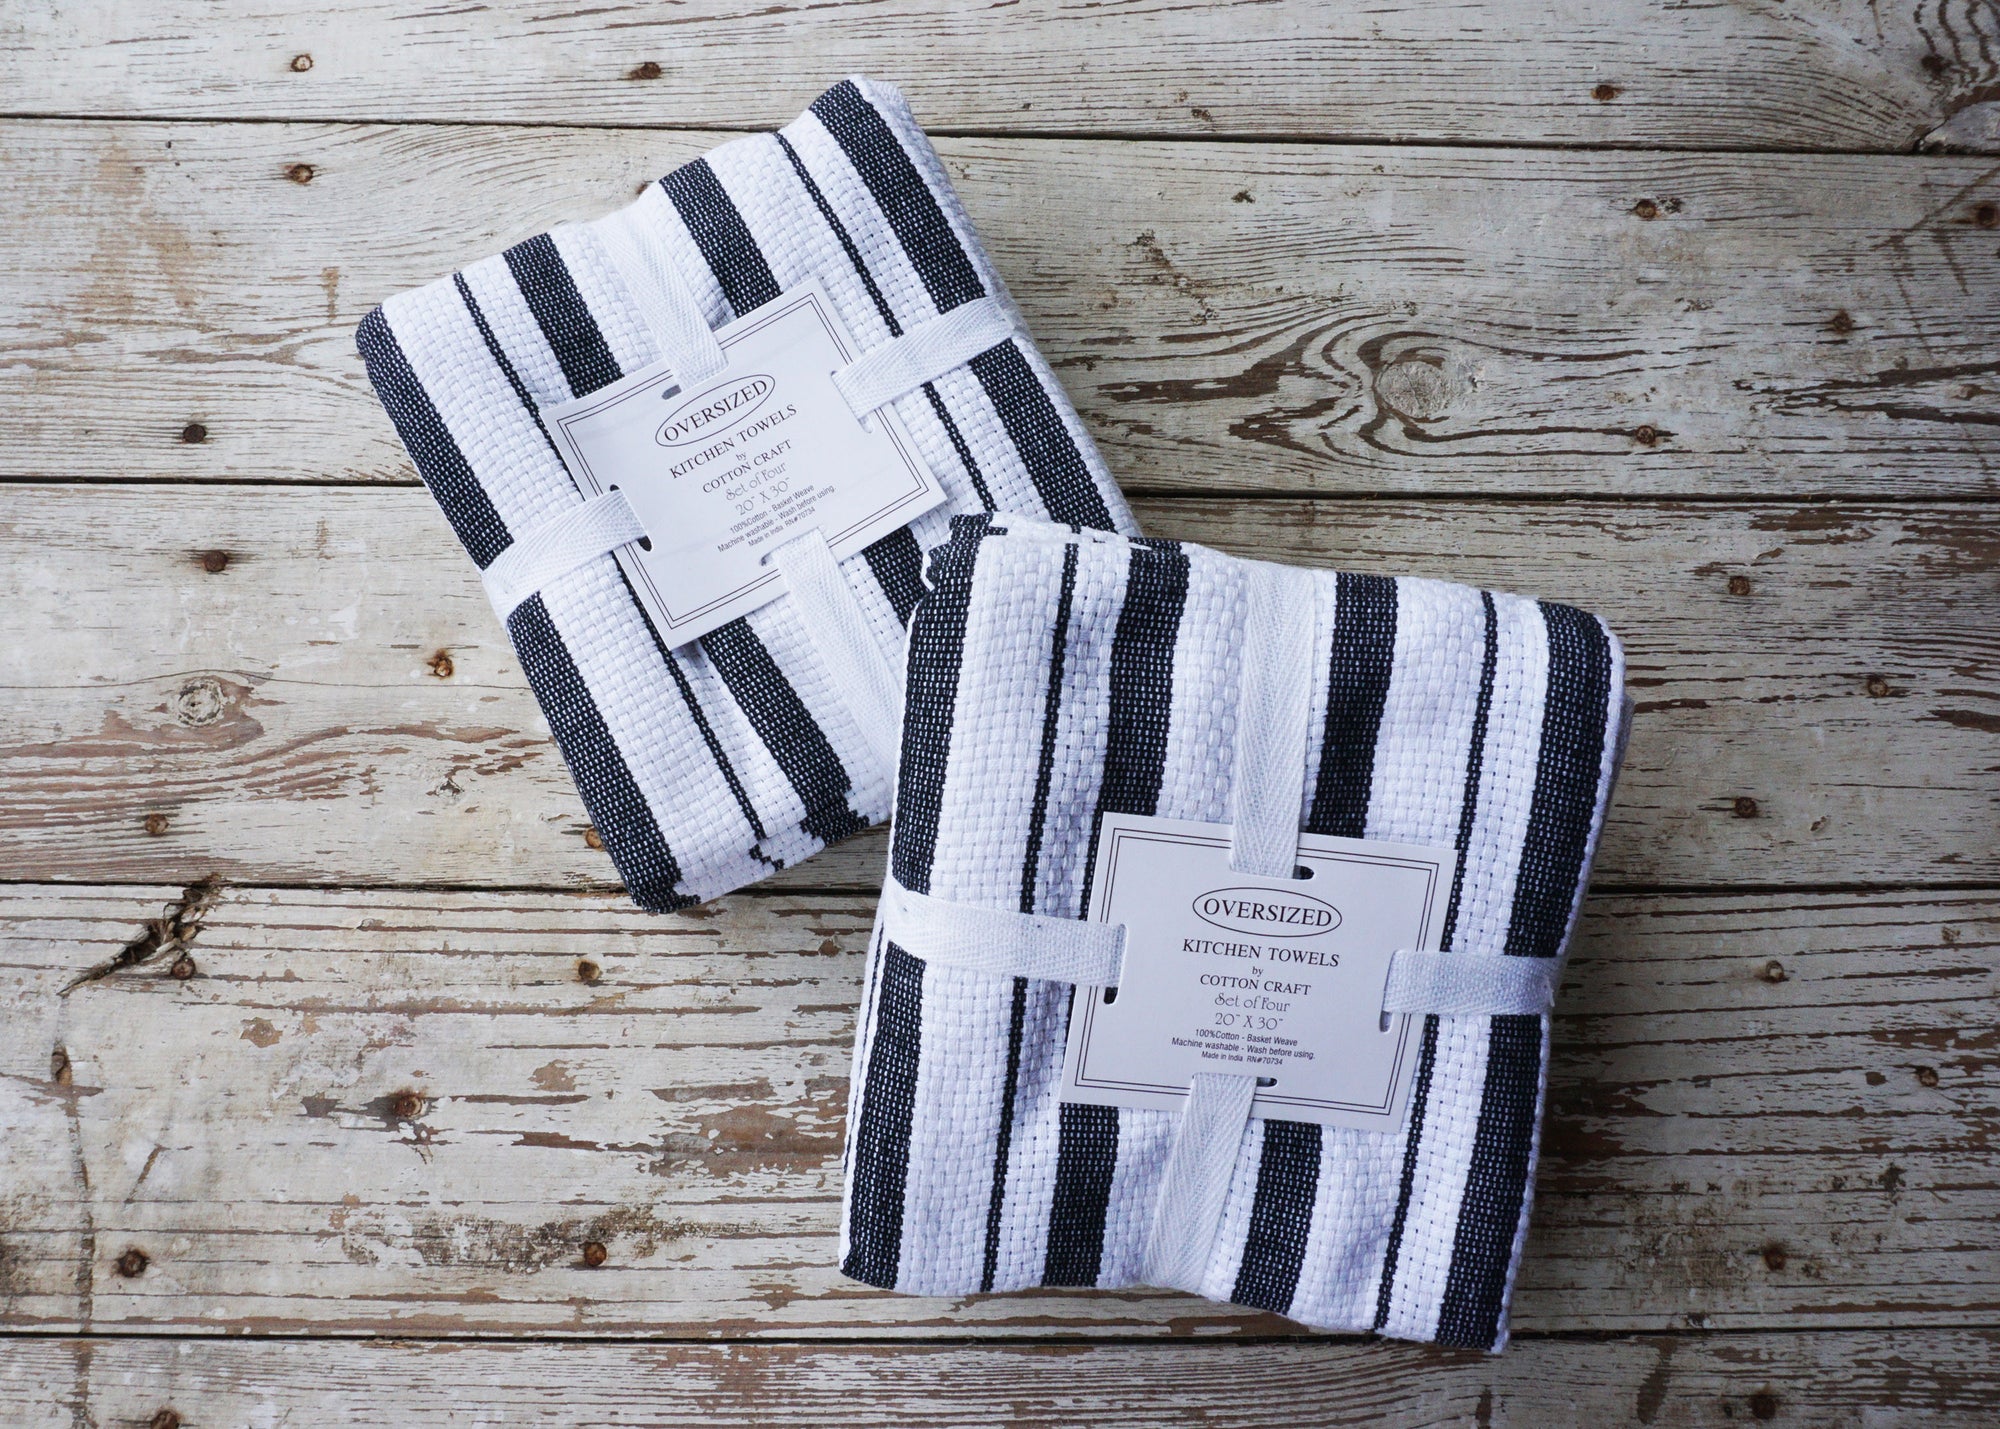 Dish Towels - Black and White Striped